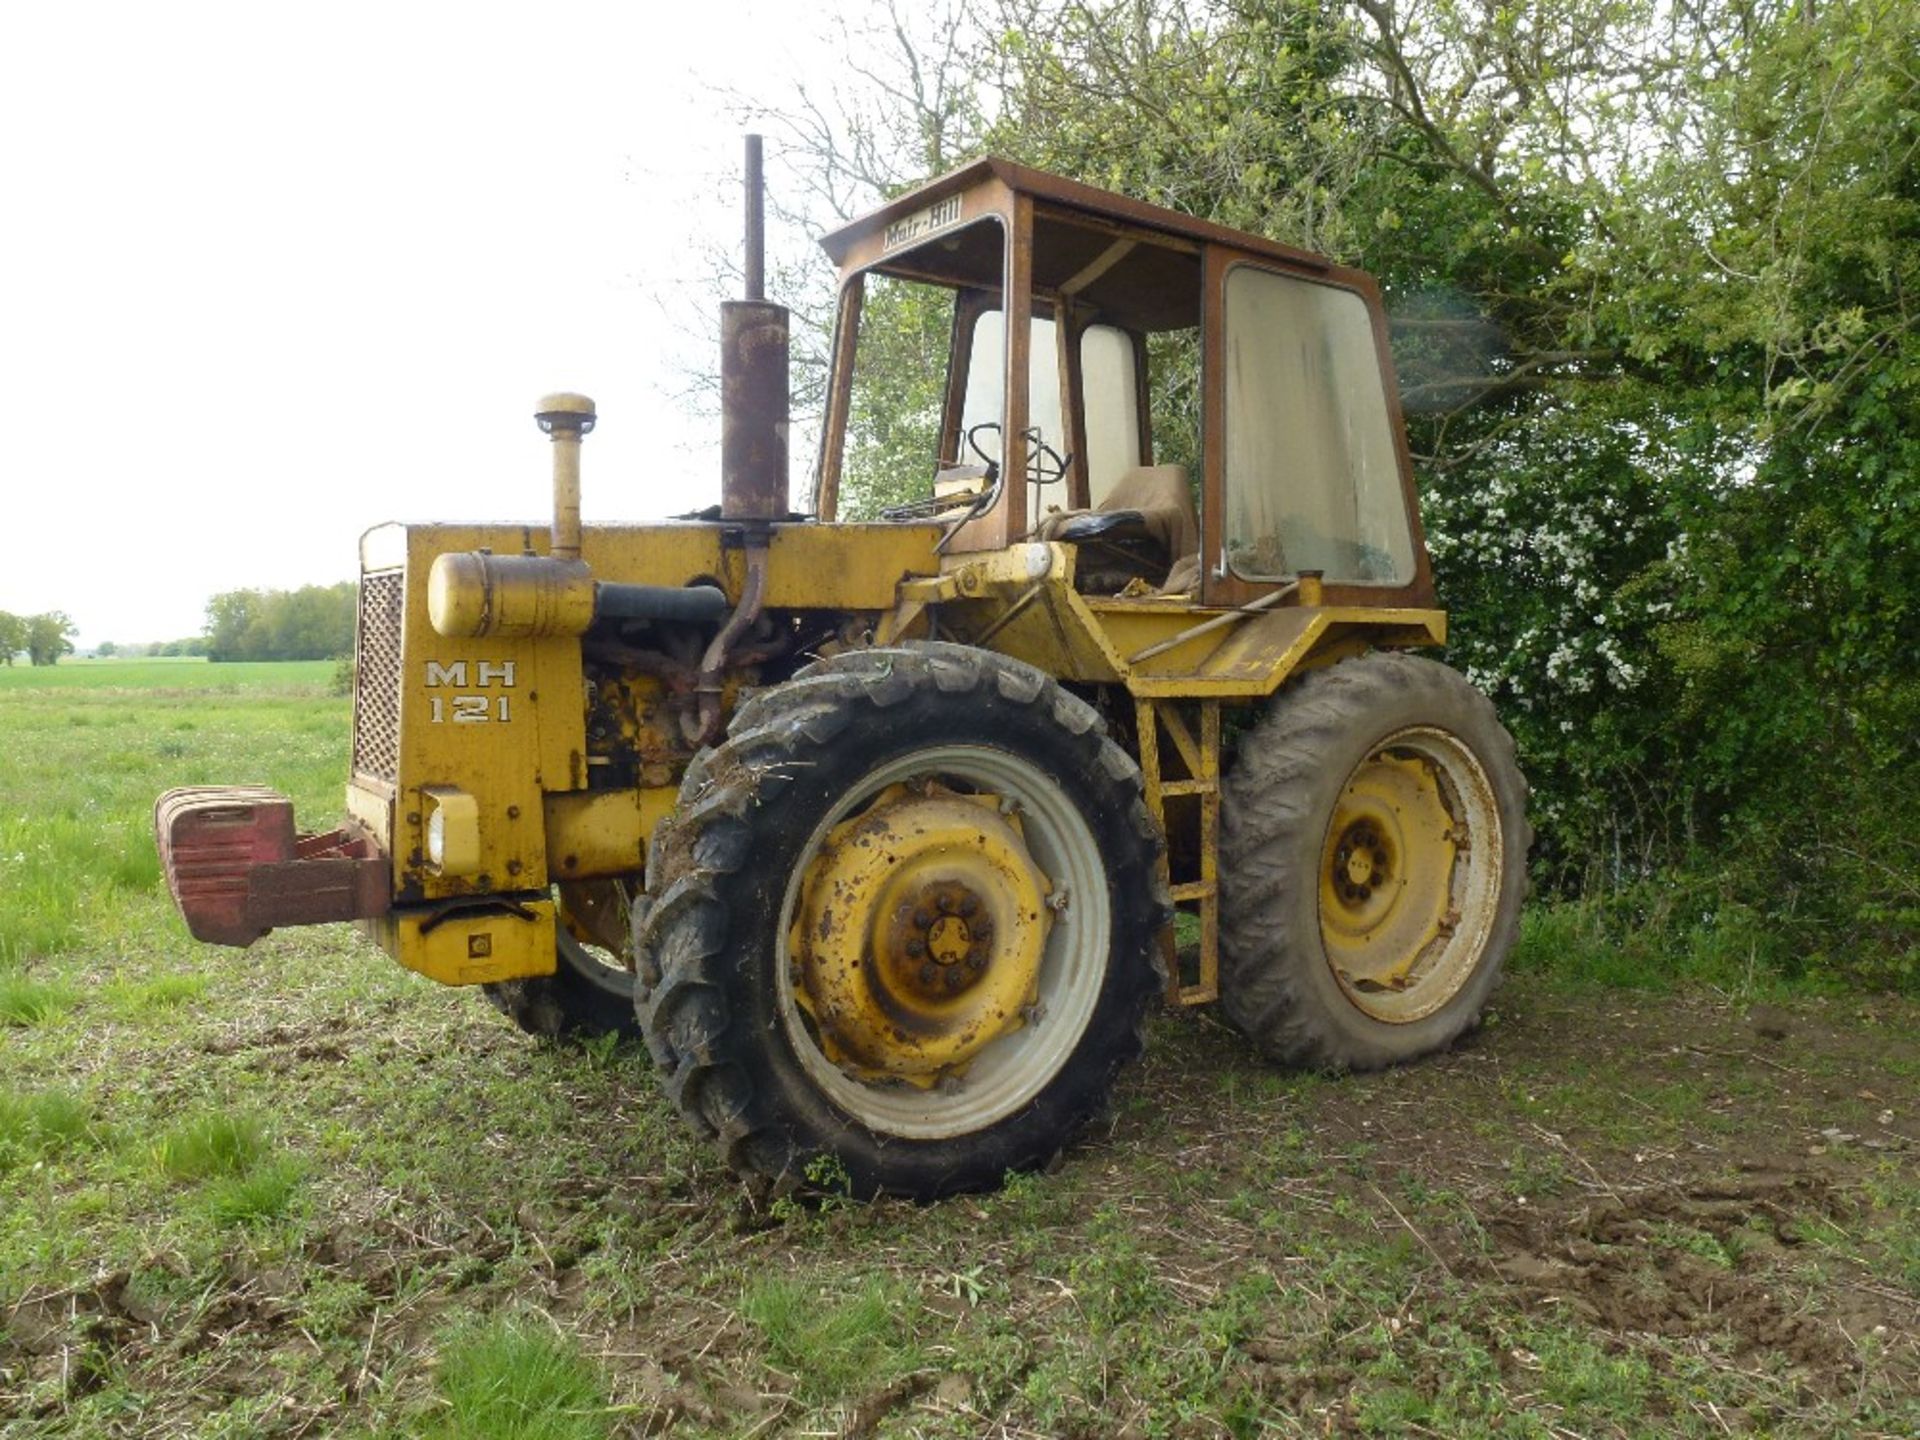 Muir Hill MH121 4wd tractor, 4053 hours, complete with front weights, reg XJB 594N,